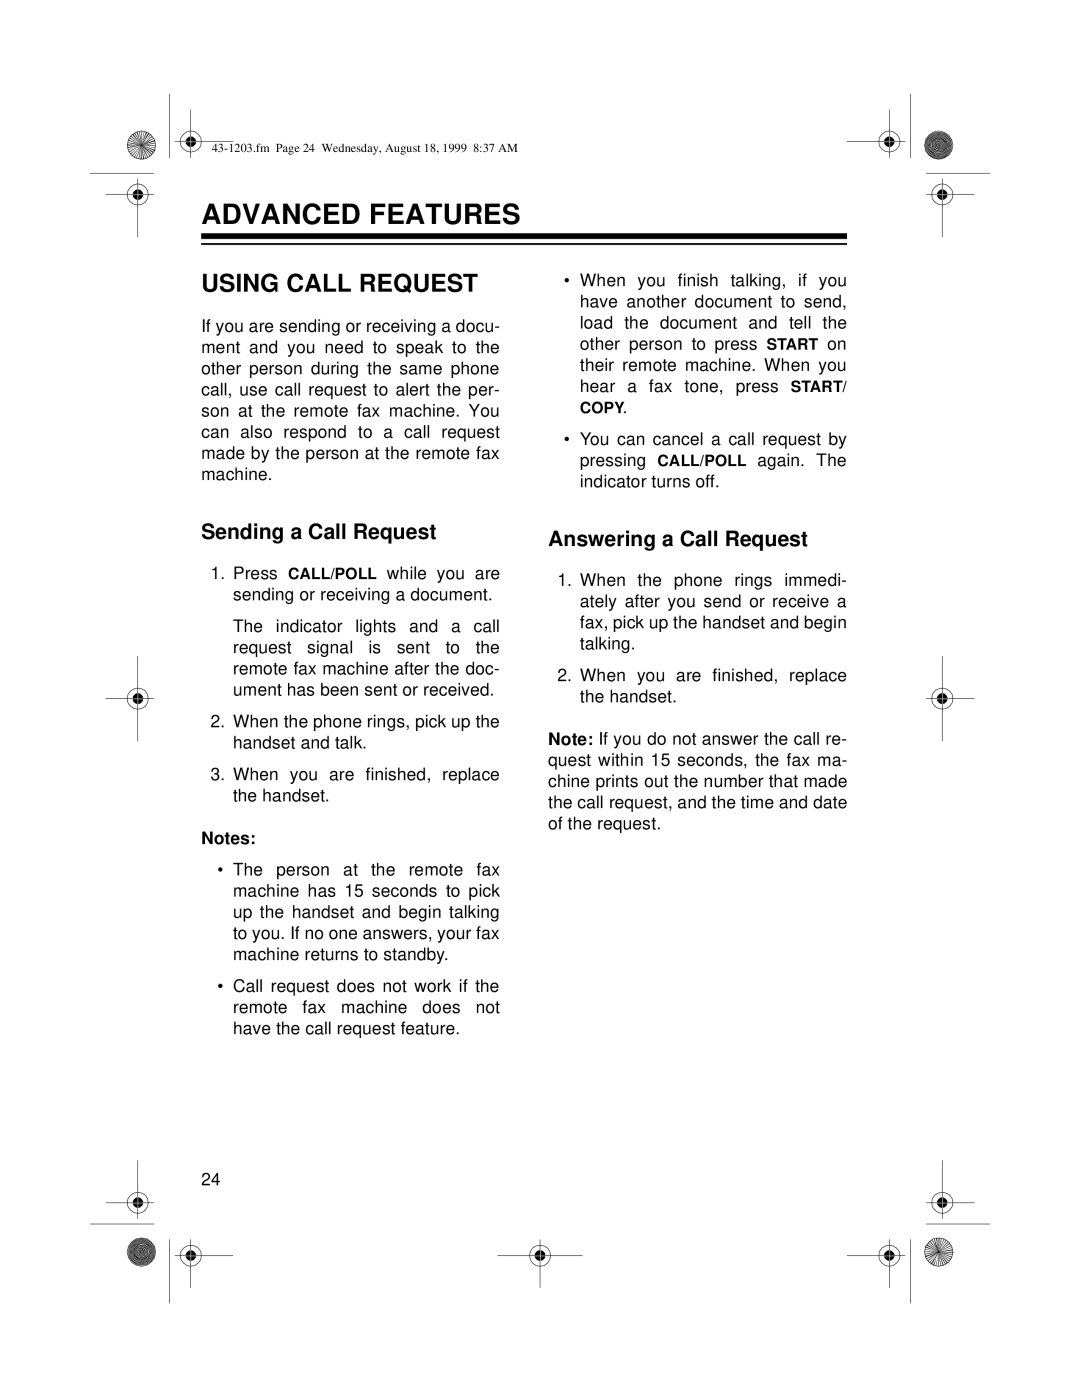 Radio Shack TFX-1031 owner manual Advanced Features, Using Call Request, Sending a Call Request, Answering a Call Request 